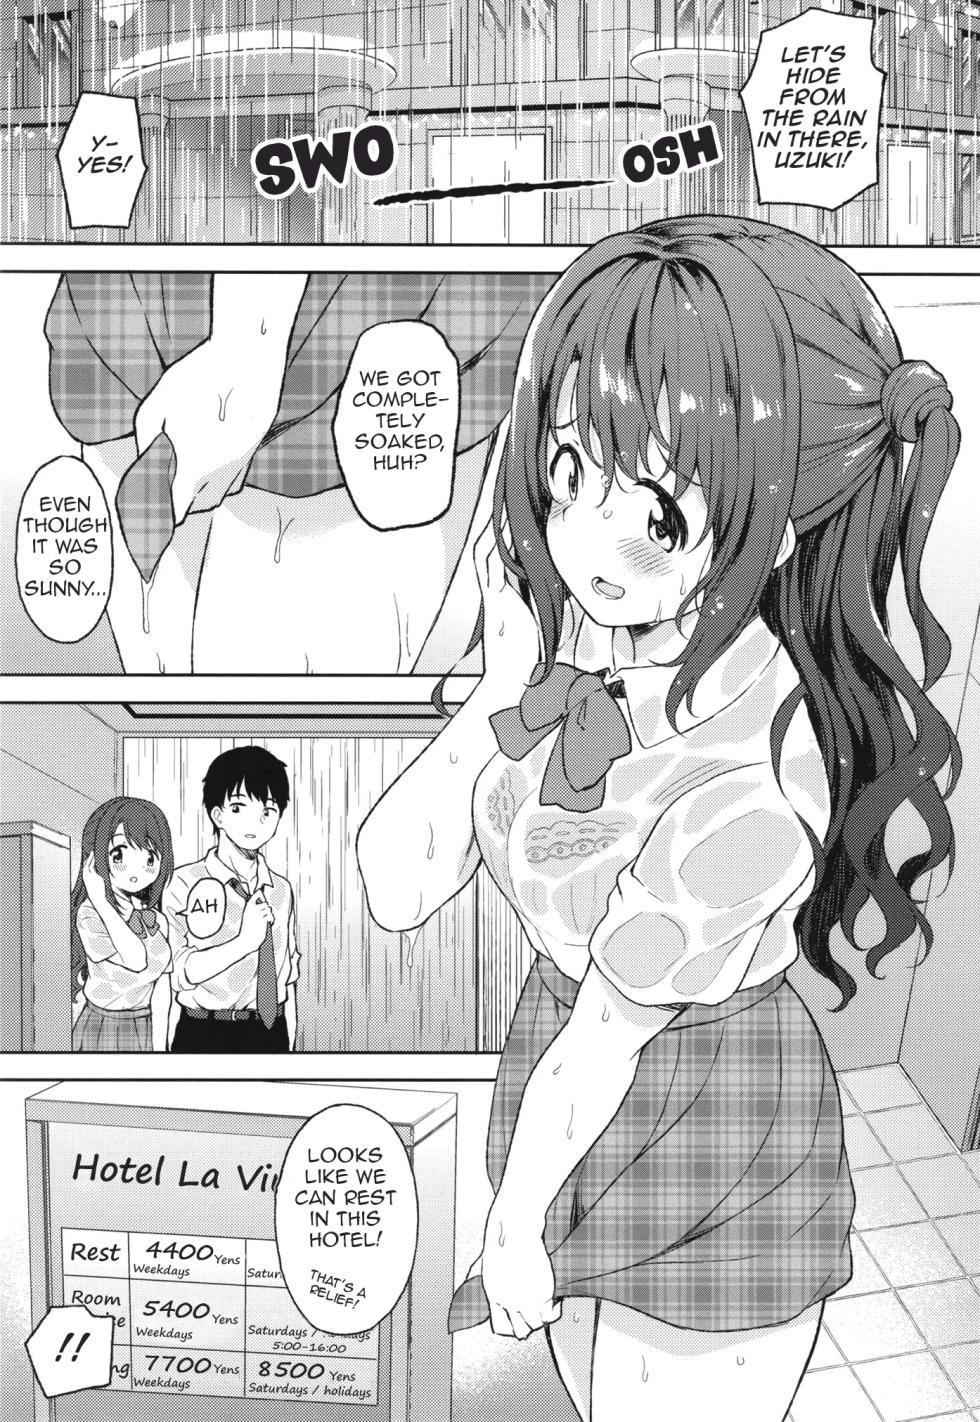 Hidding from the rain in a love hotel with Uzuki - Page 2